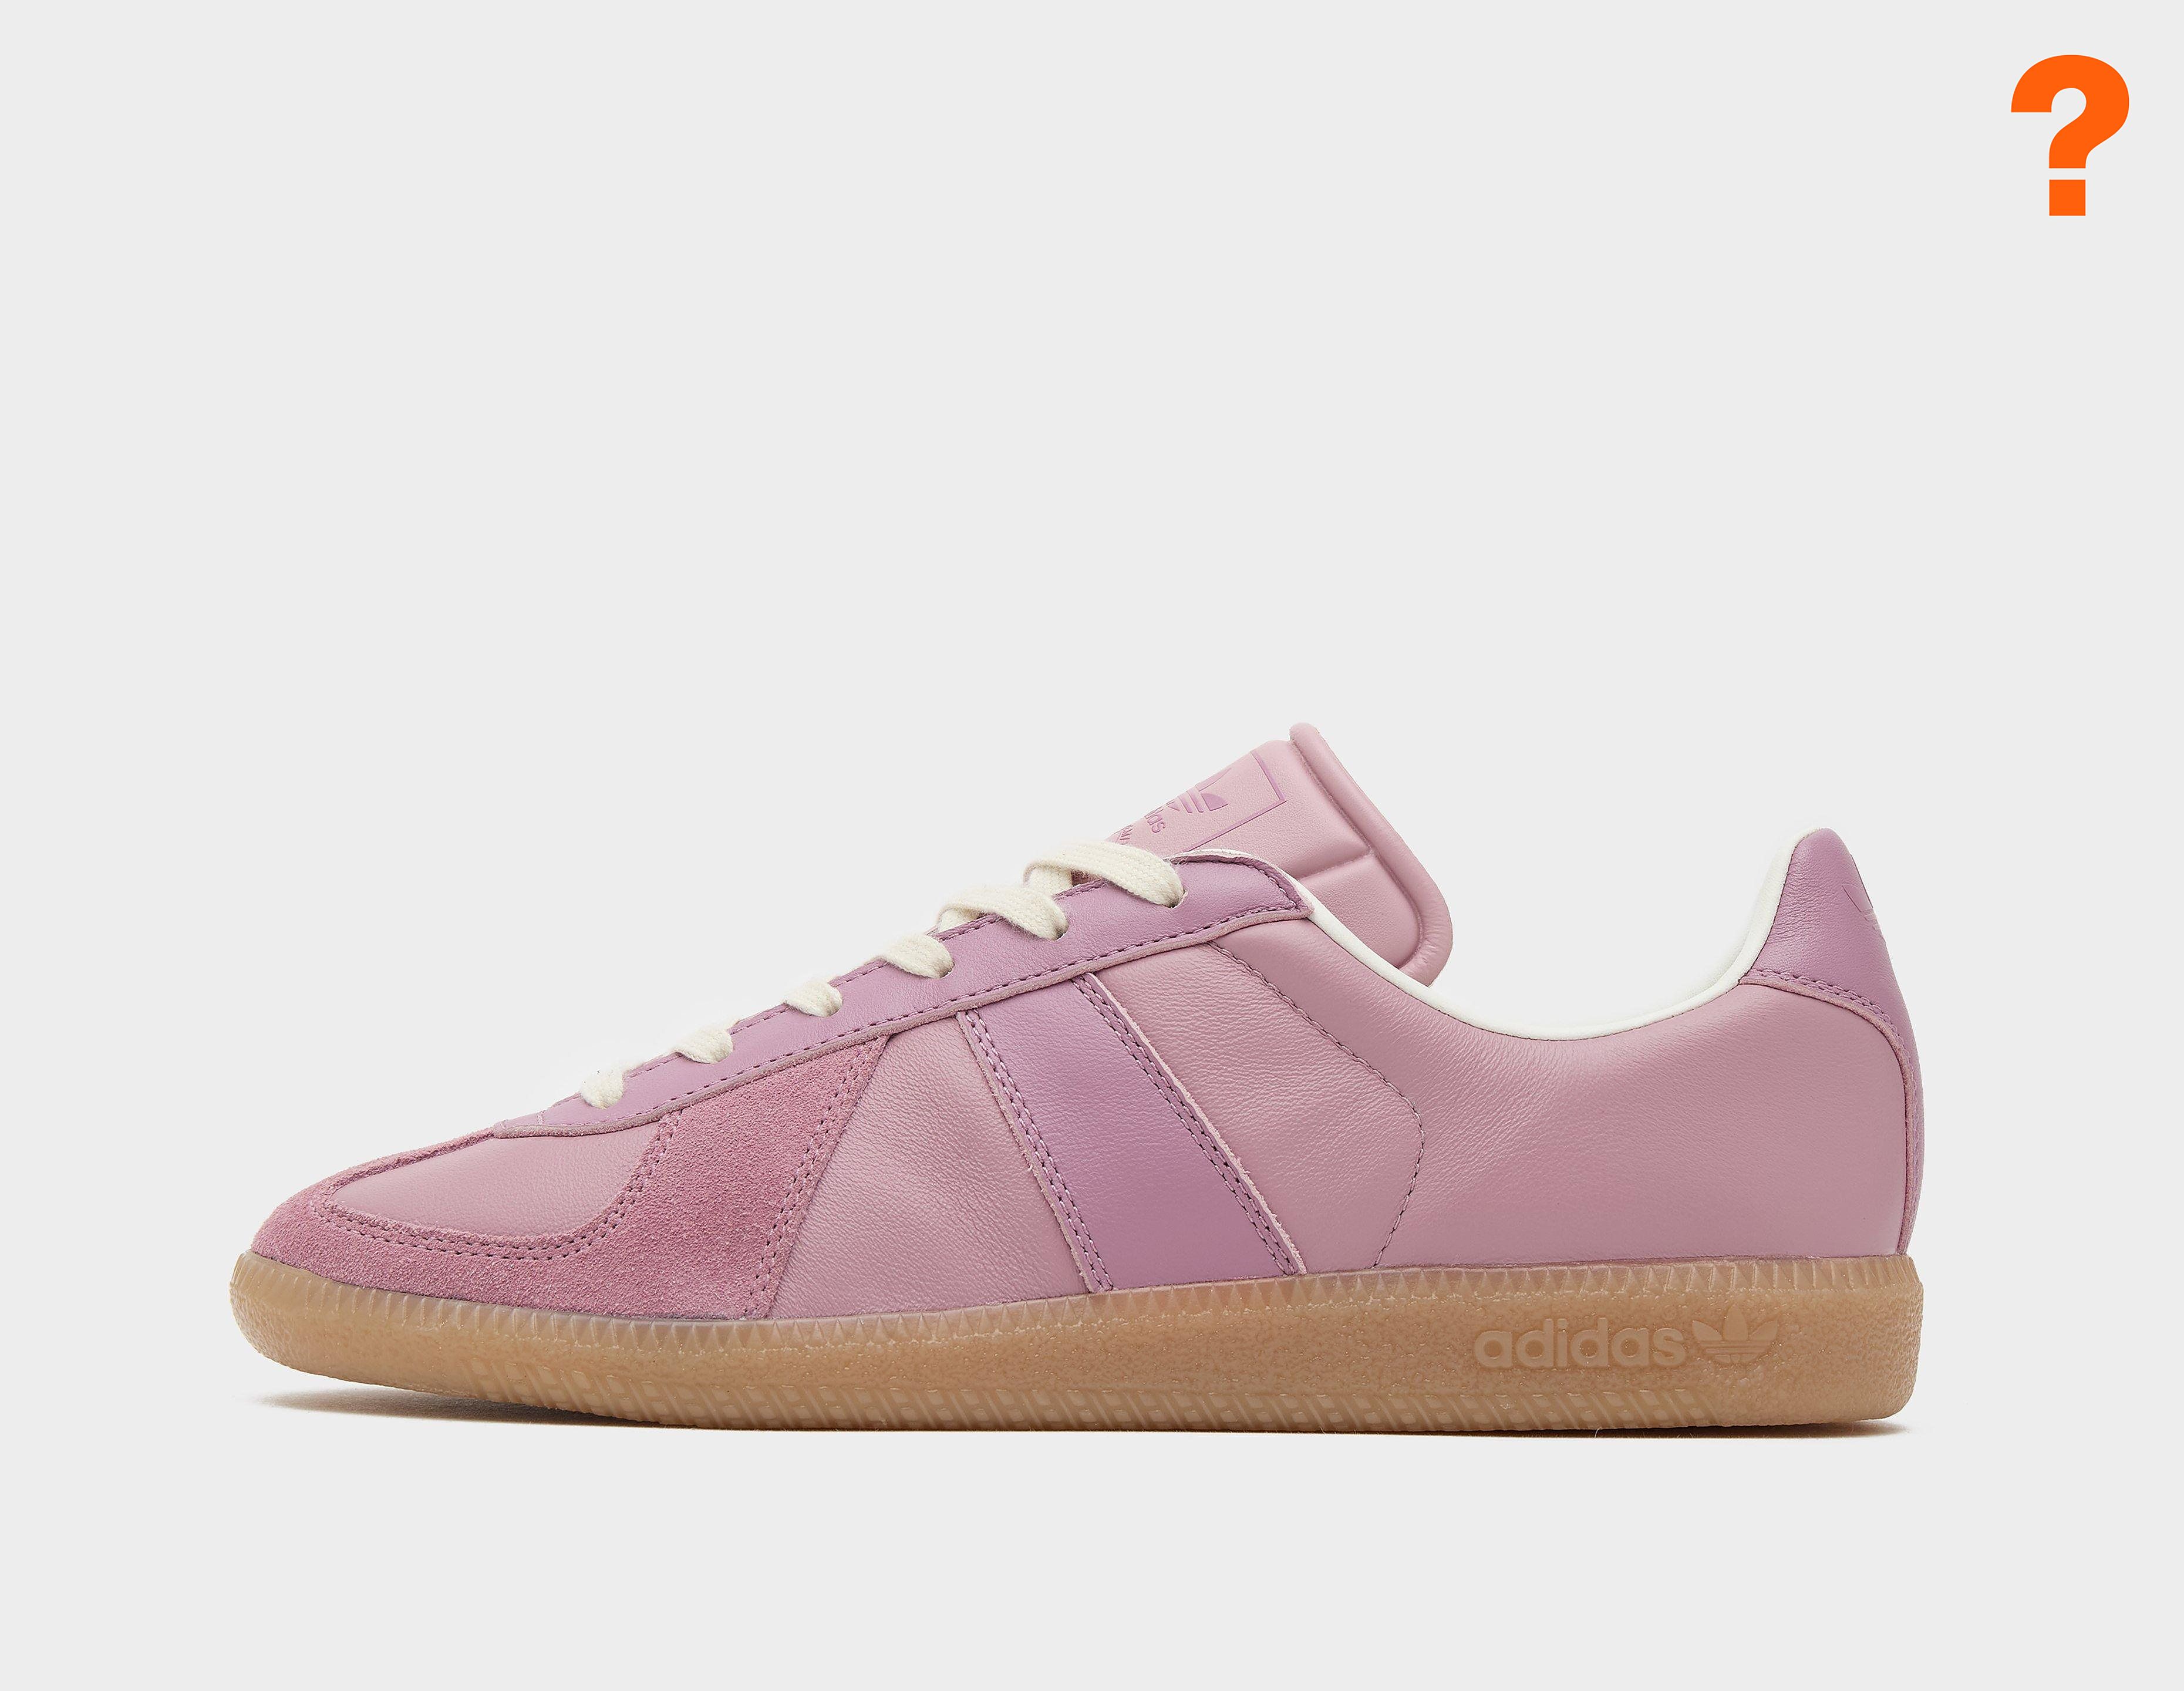 Adidas Originals BW Army Trainer Women's - size? exclusive, Pink